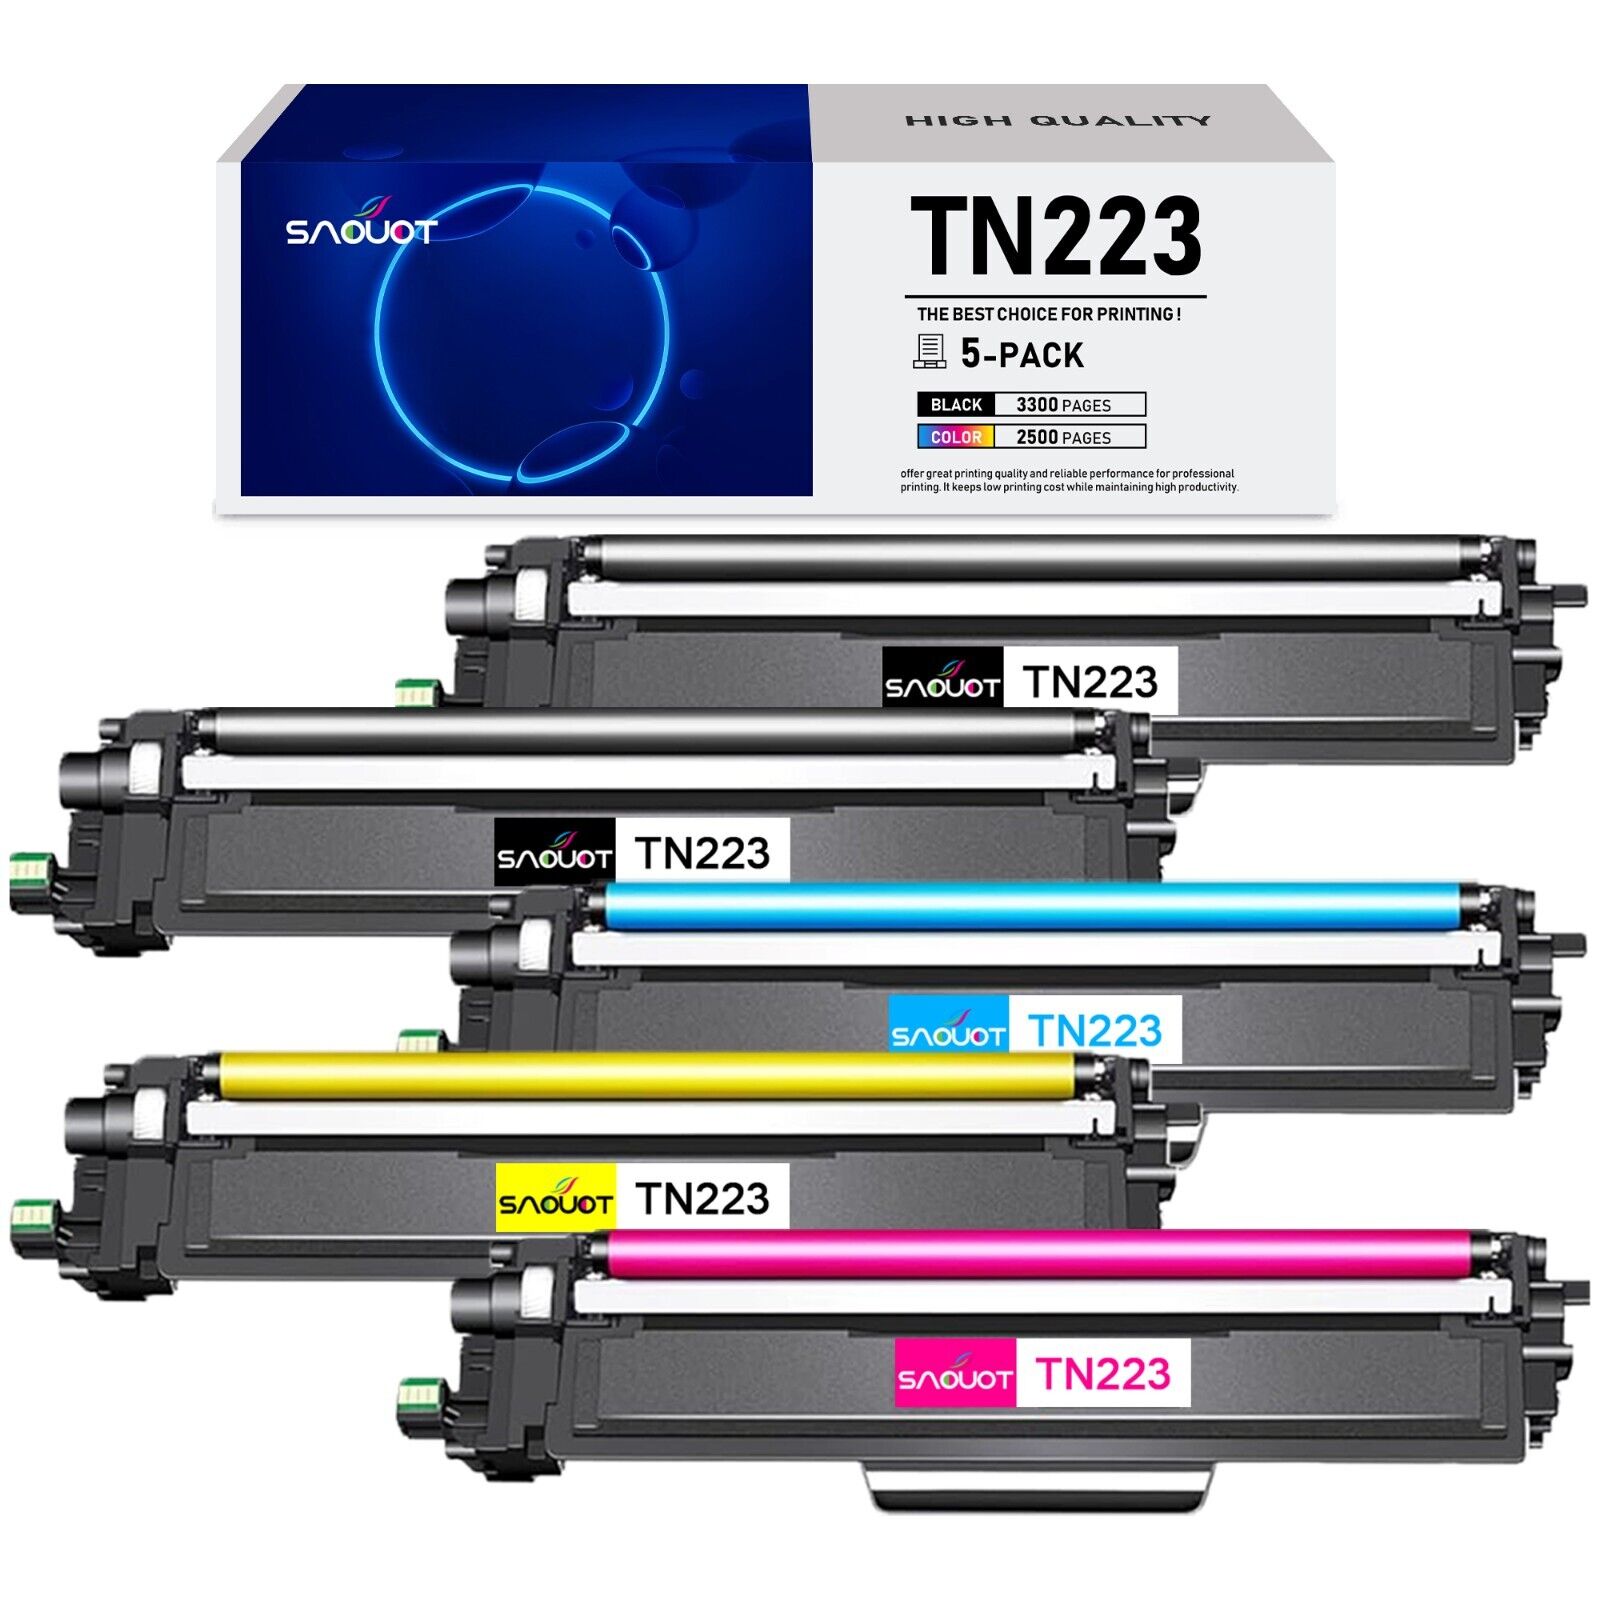 TN223 Toner Cartridge Replacement for Brother HL-L3290CDW L3210CW MFC-L3750CDW